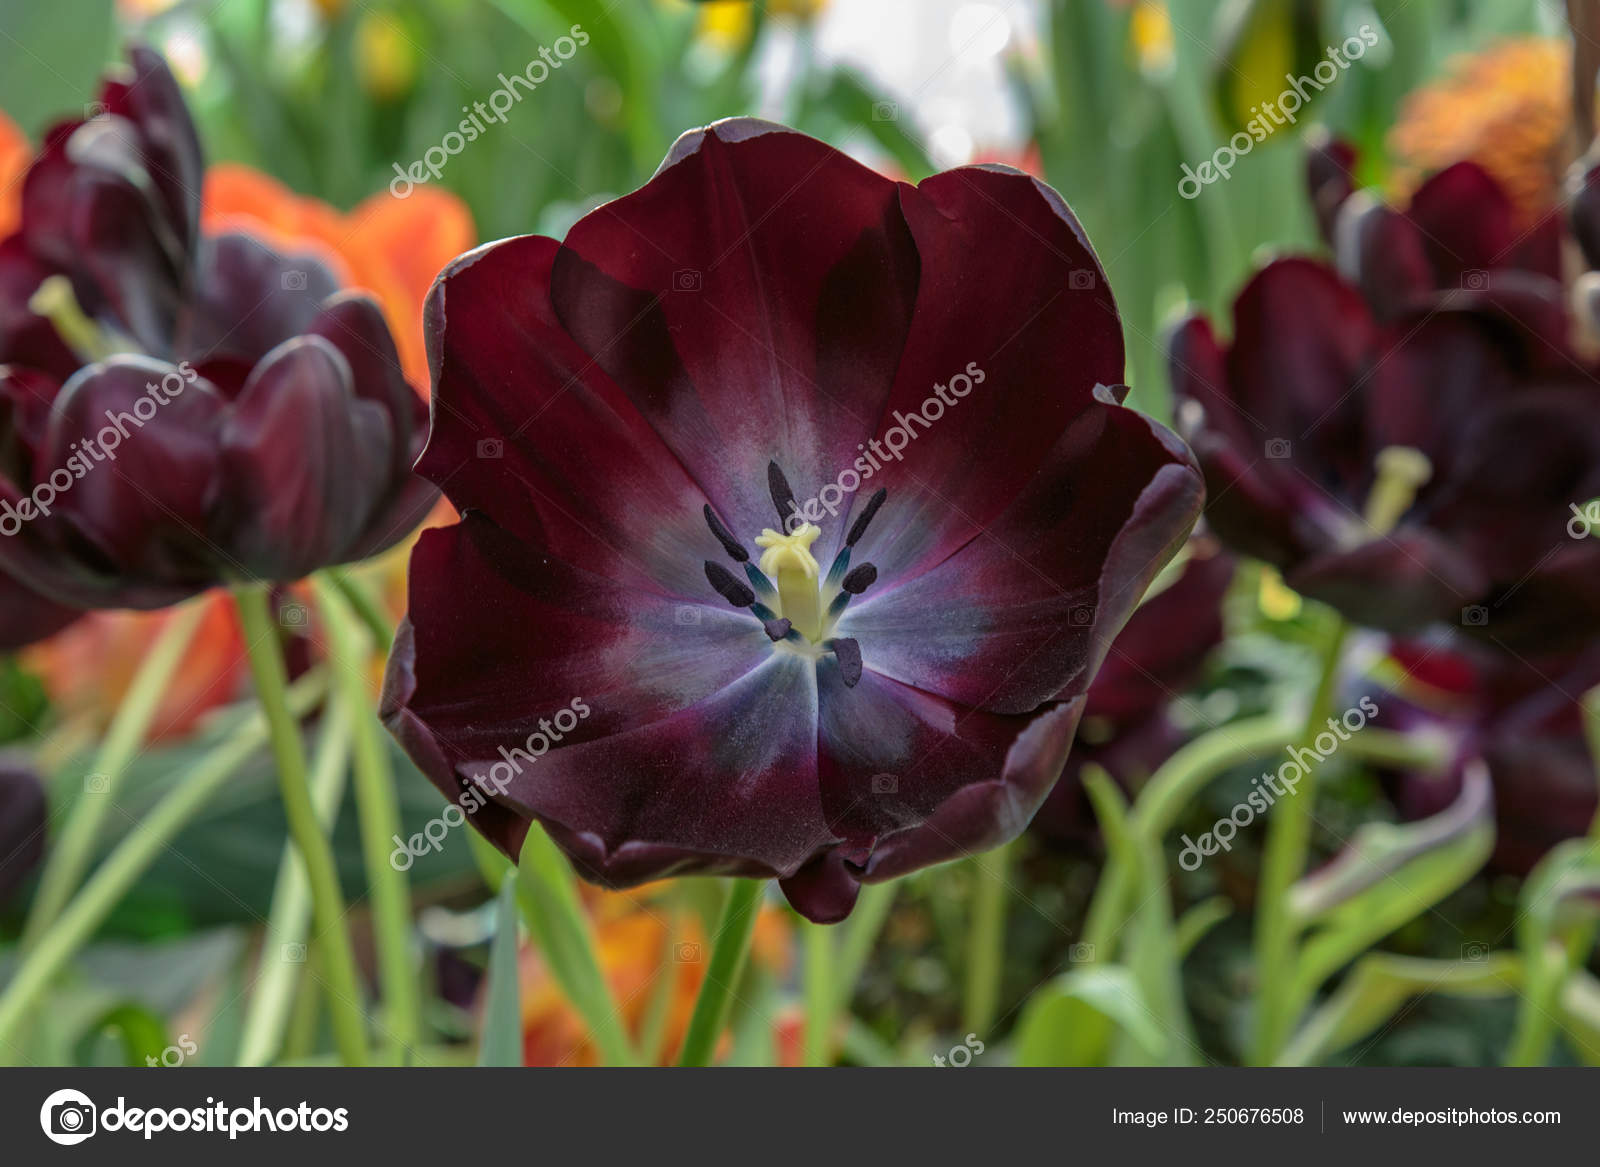 Black Tulip Flower Spring Garden Background Beautiful Tulips Growing At Field Queen Of The Night Tulips Otherwise Known As Black Tulips Stock Photo C Gilmanshin 250676508